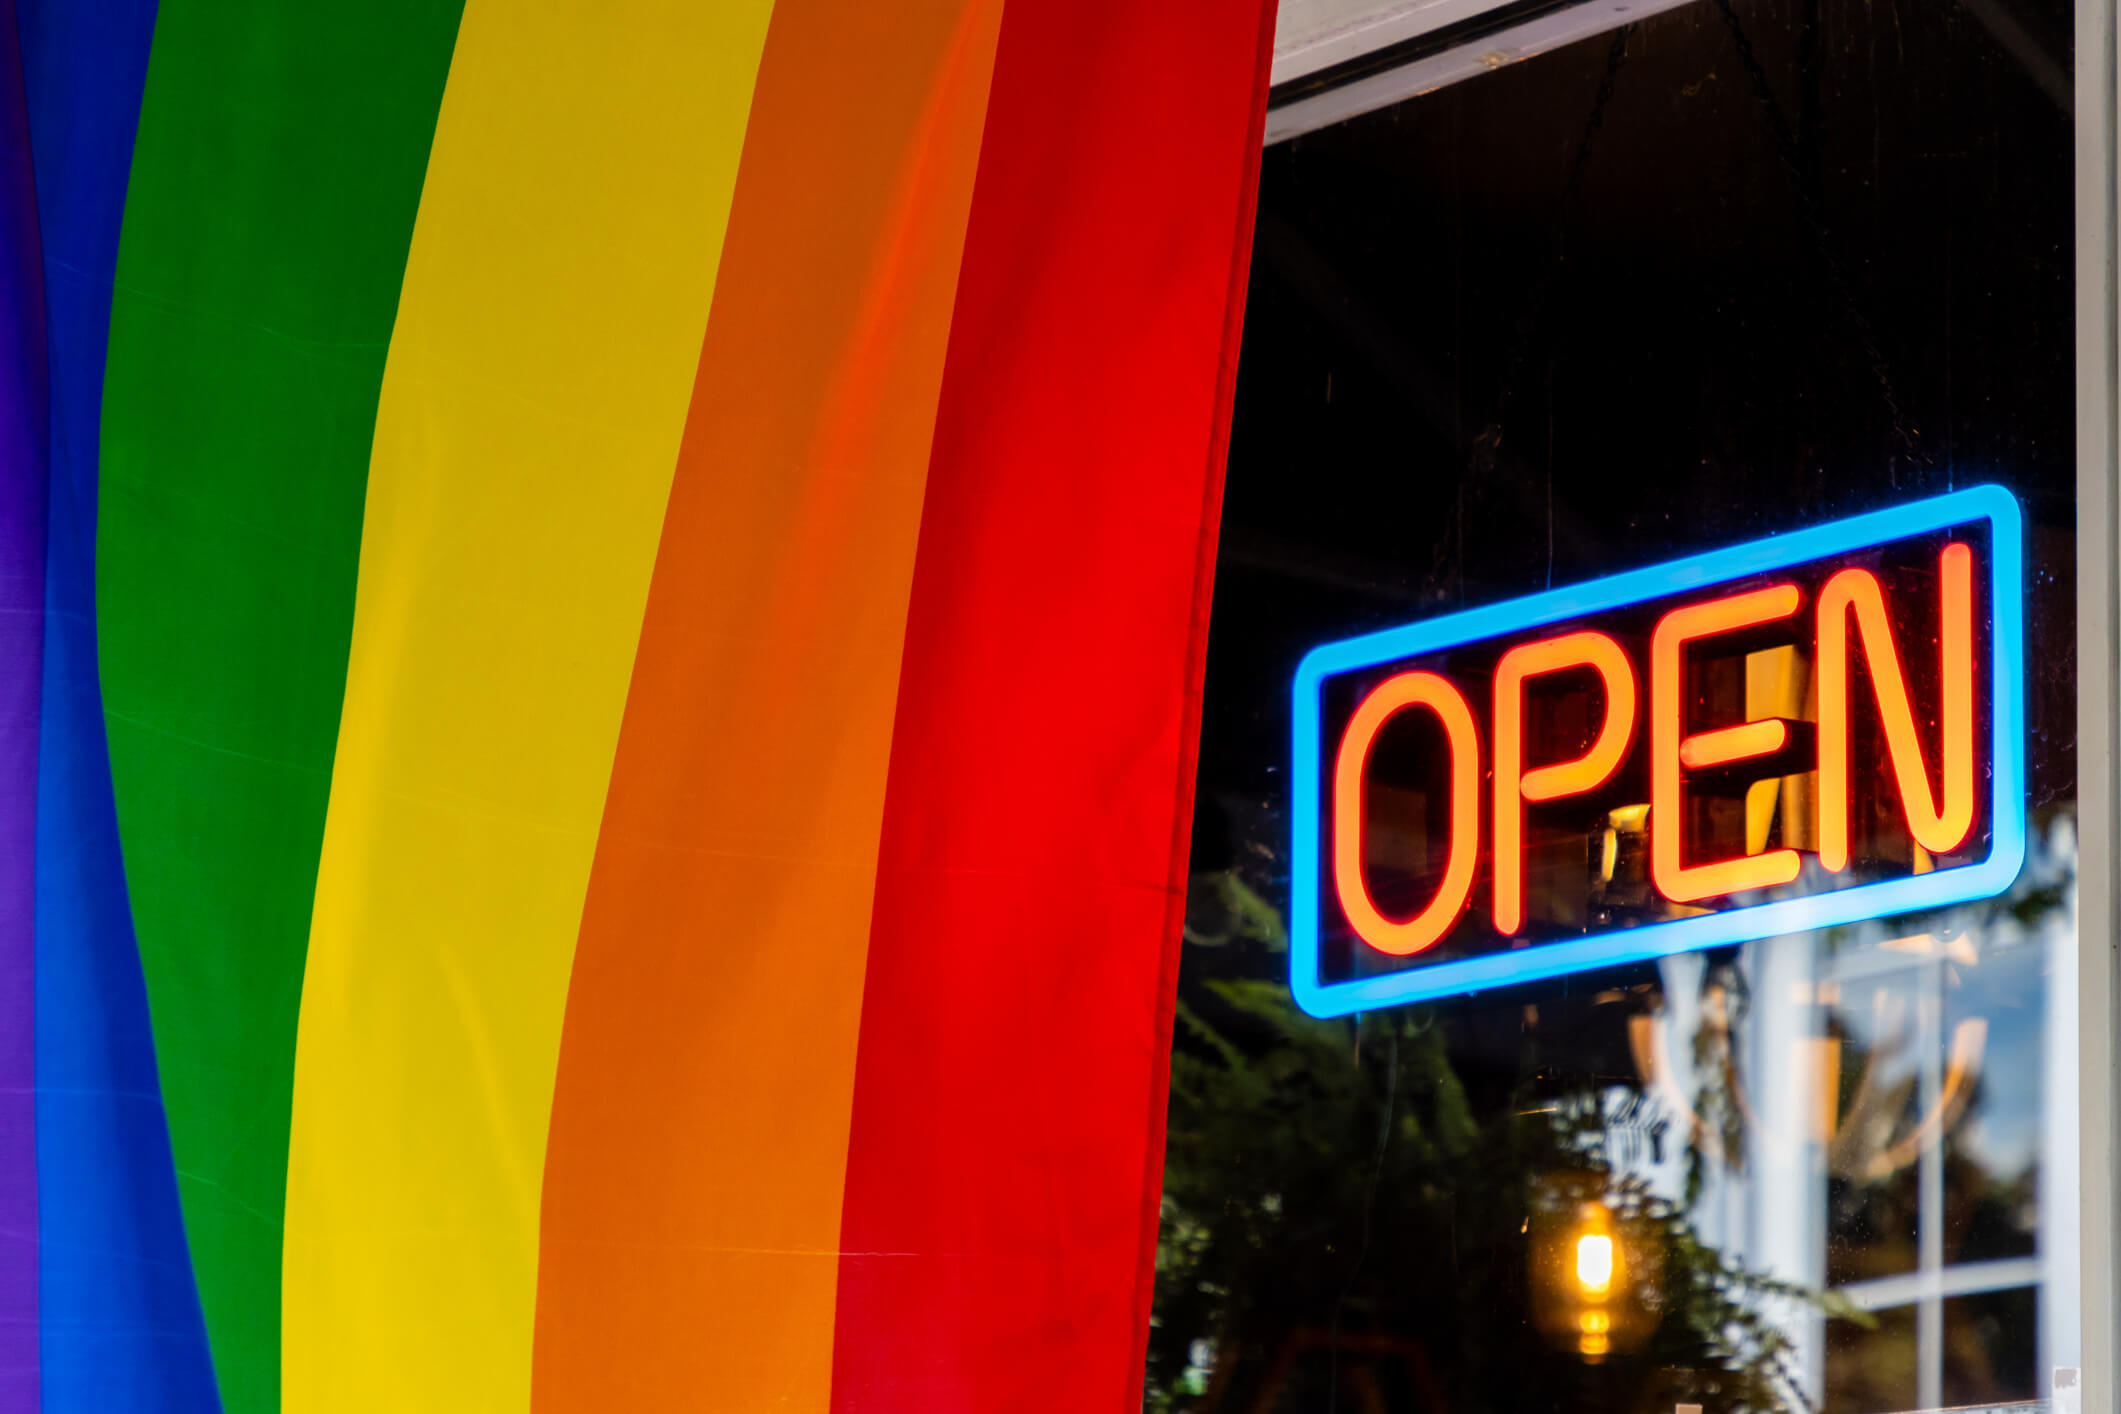 A rainbow pride flag flies in front of an open sign at a business